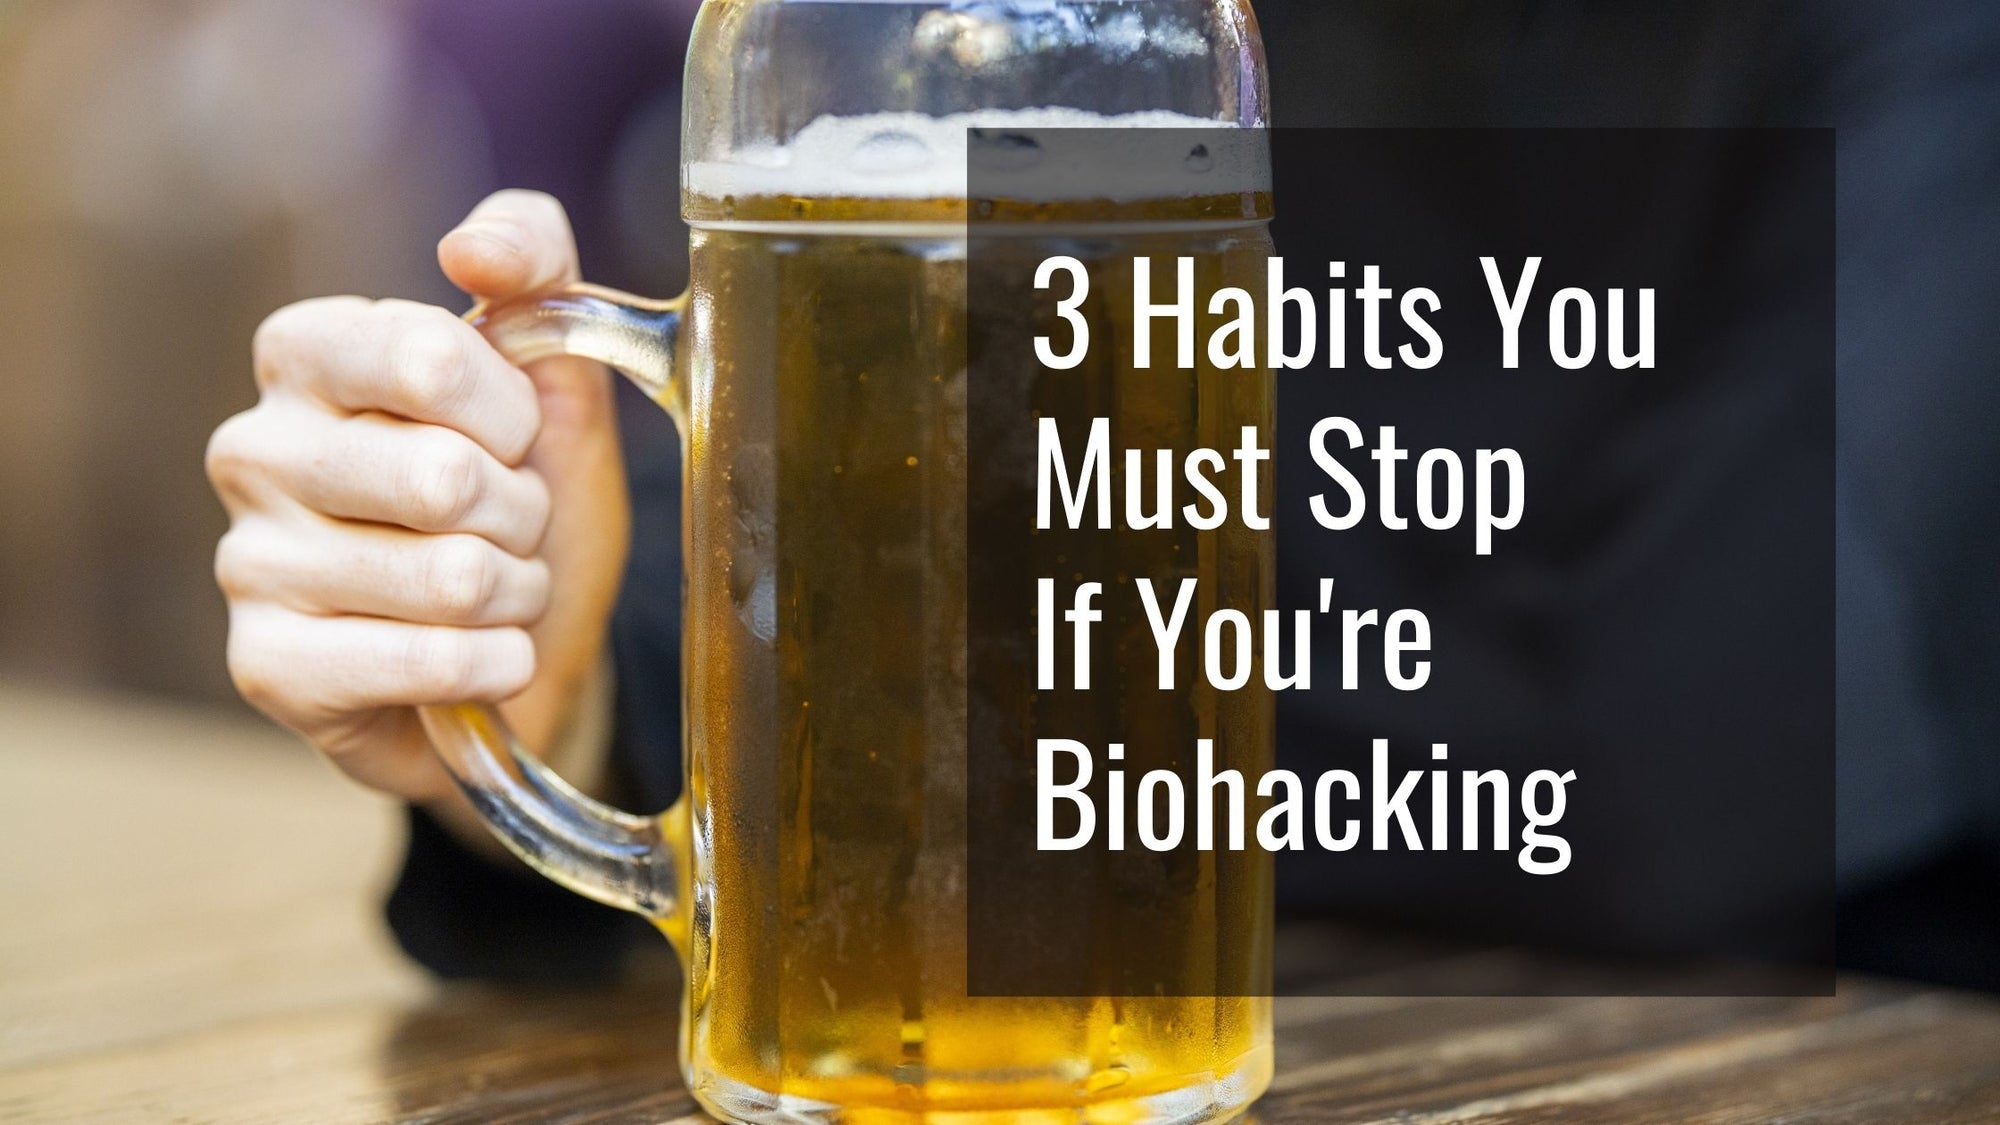 3 habits to stop if you're biohacking